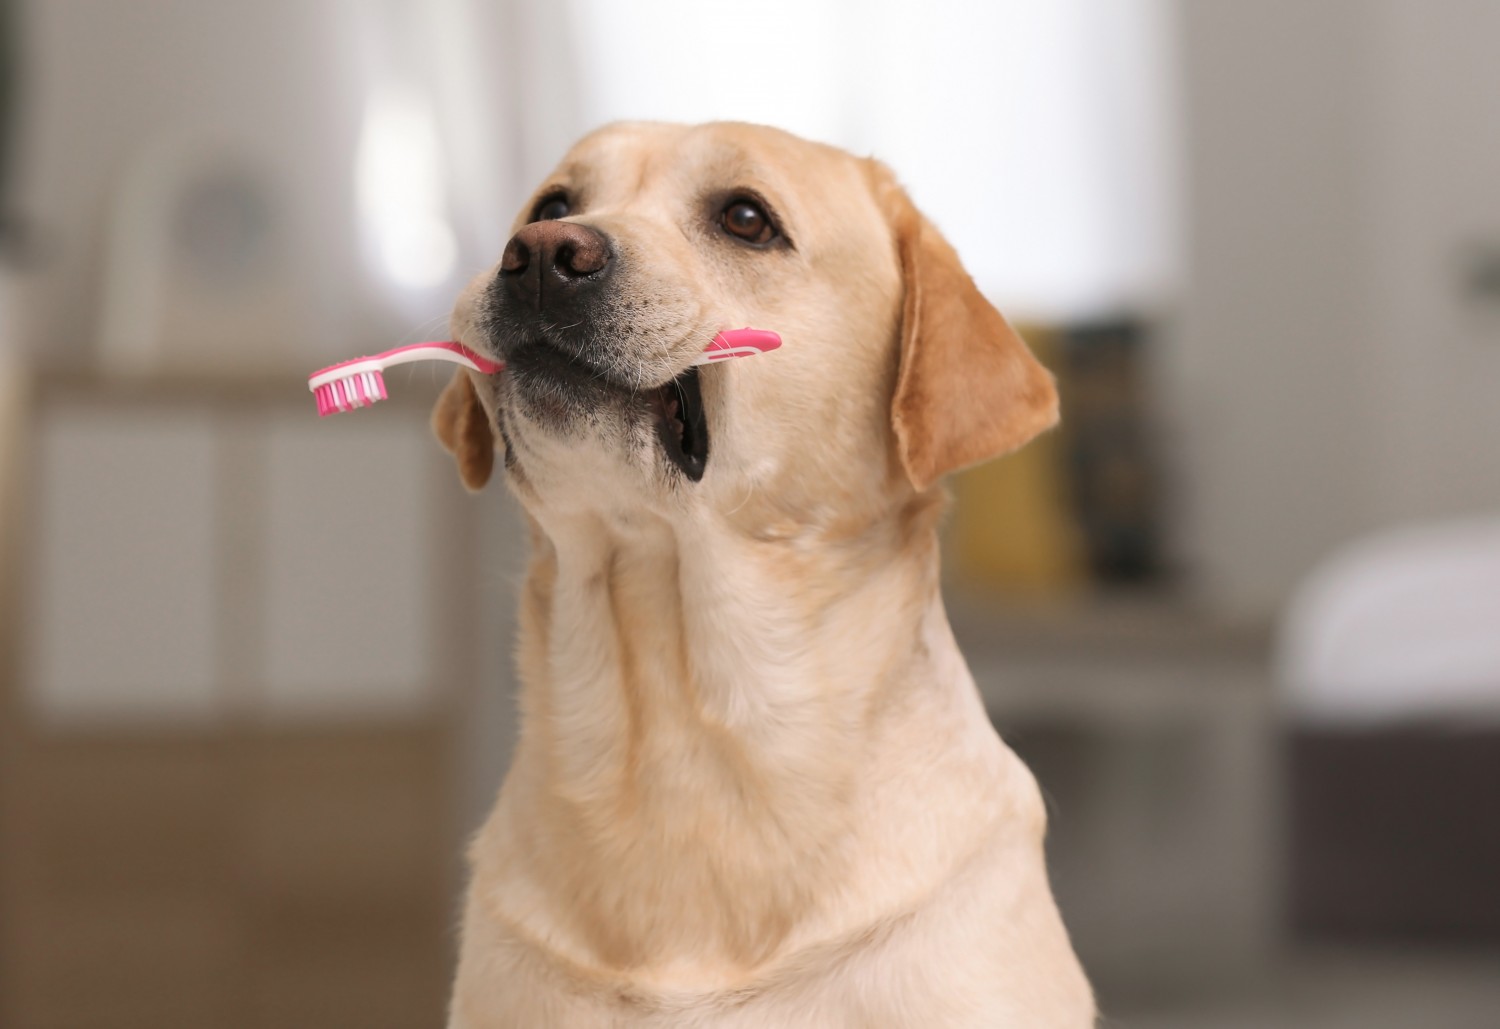 Dog with toothbrush - Dental Care